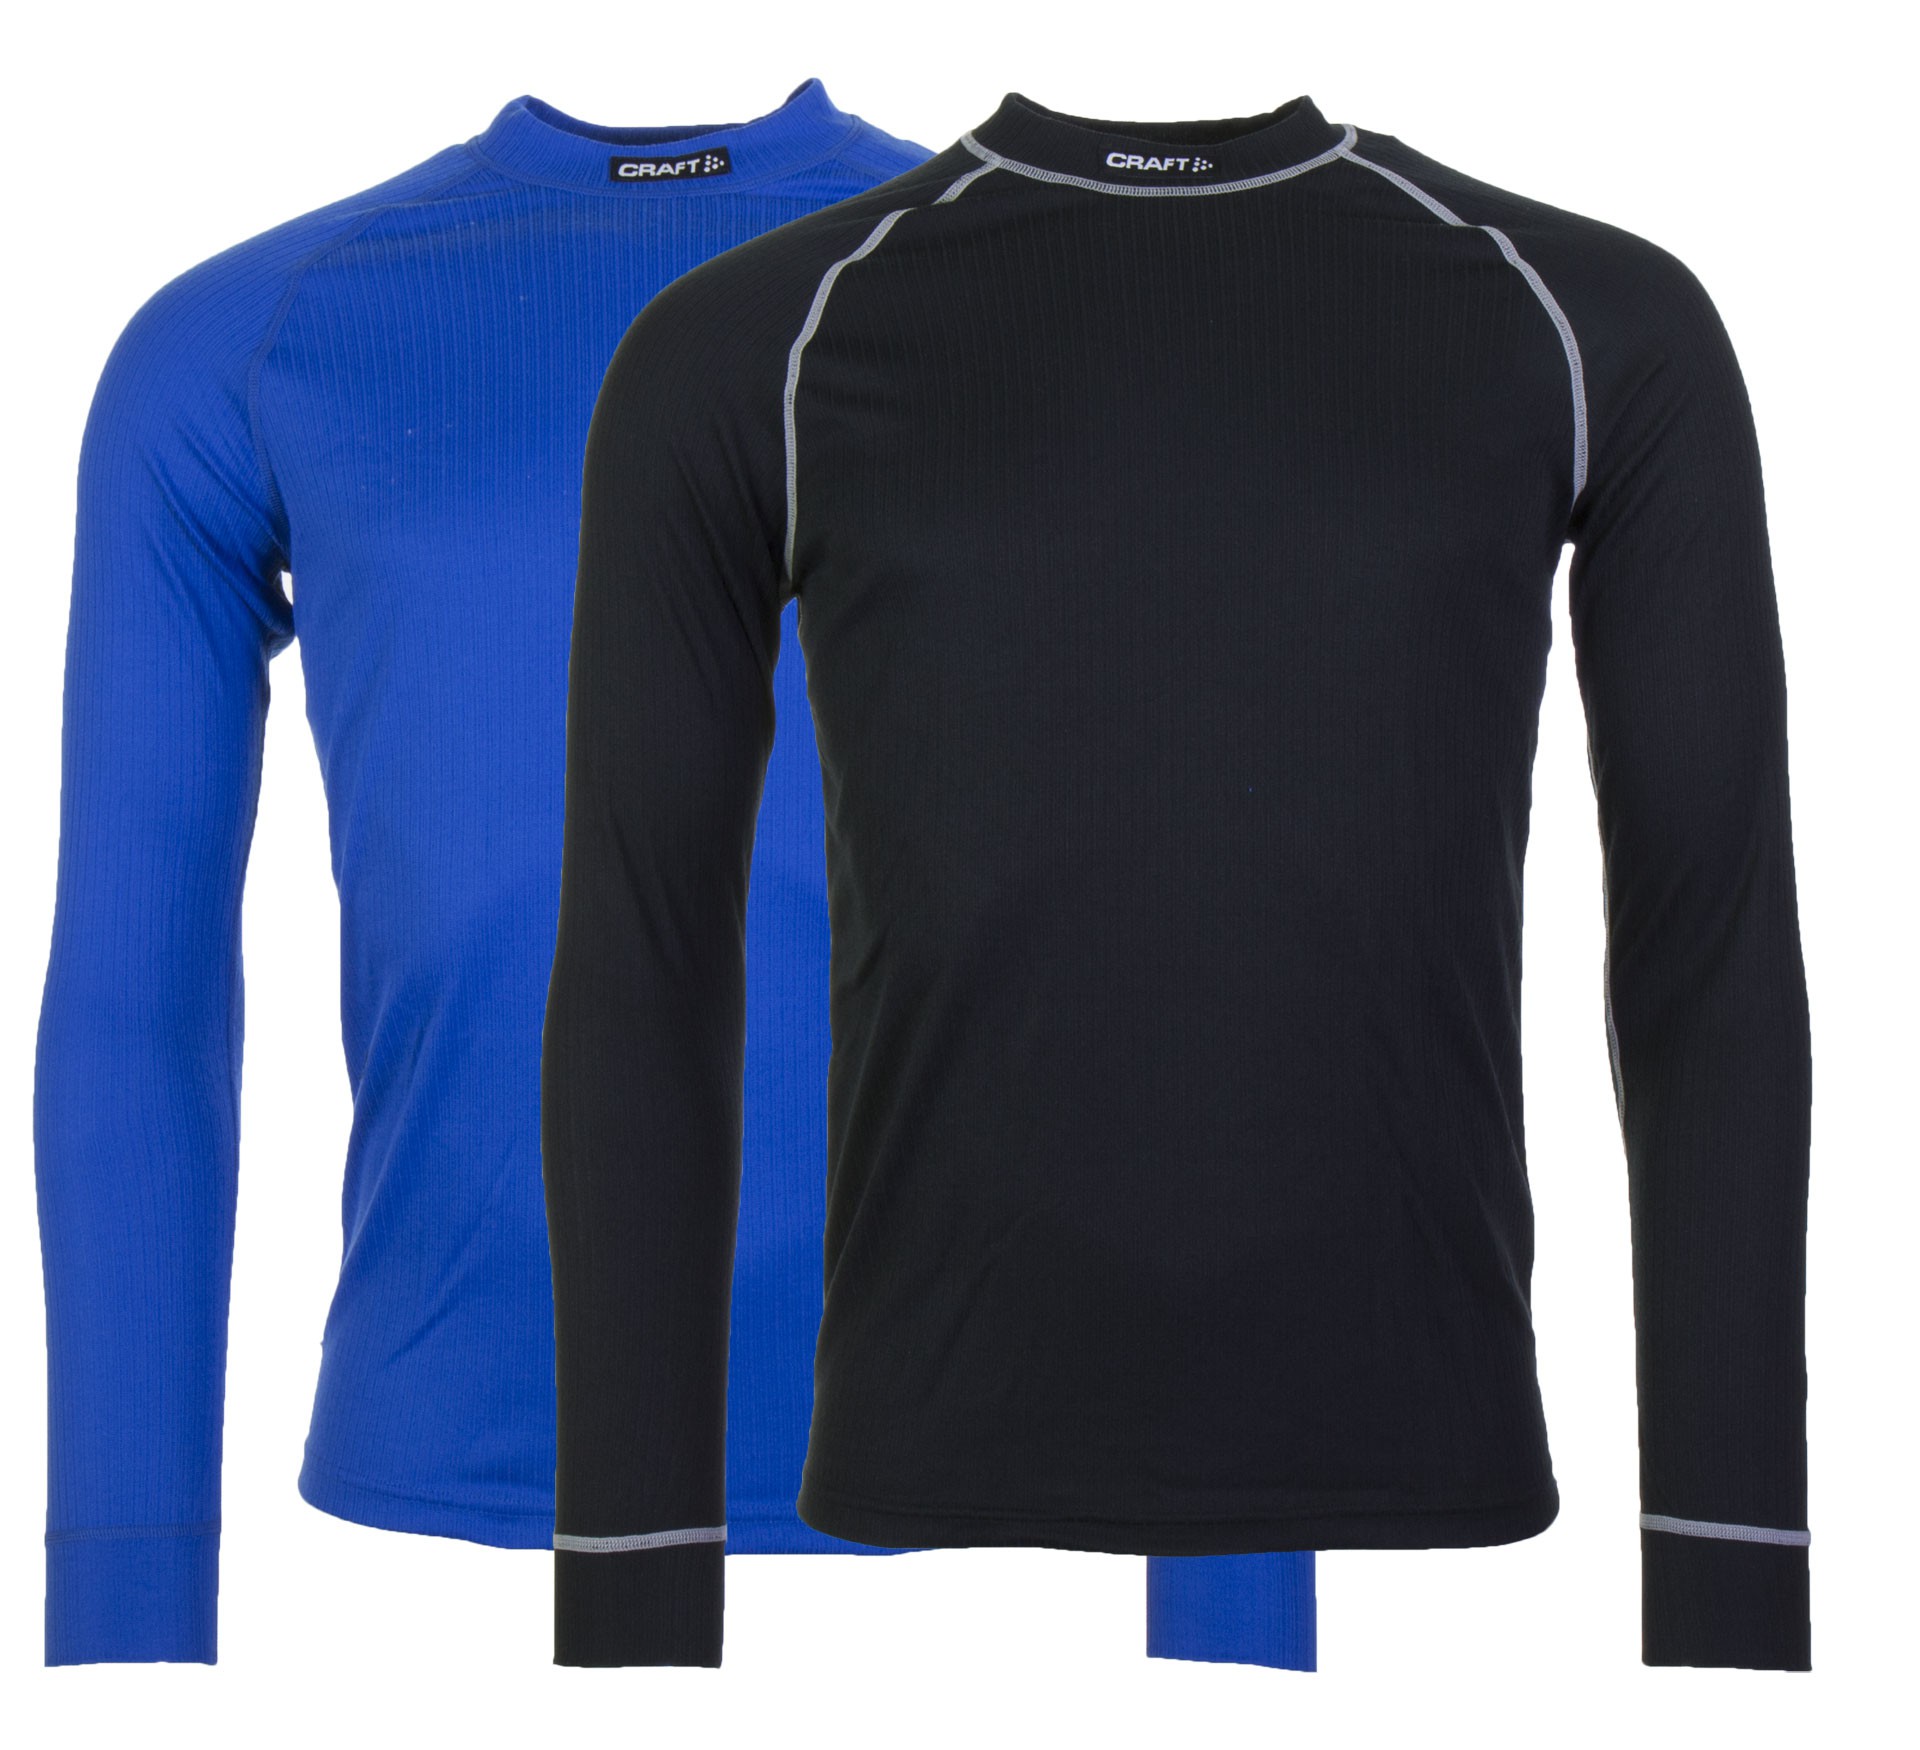 Plutosport - Craft Active Multi Longsleeve Thermo Top (2-pack)